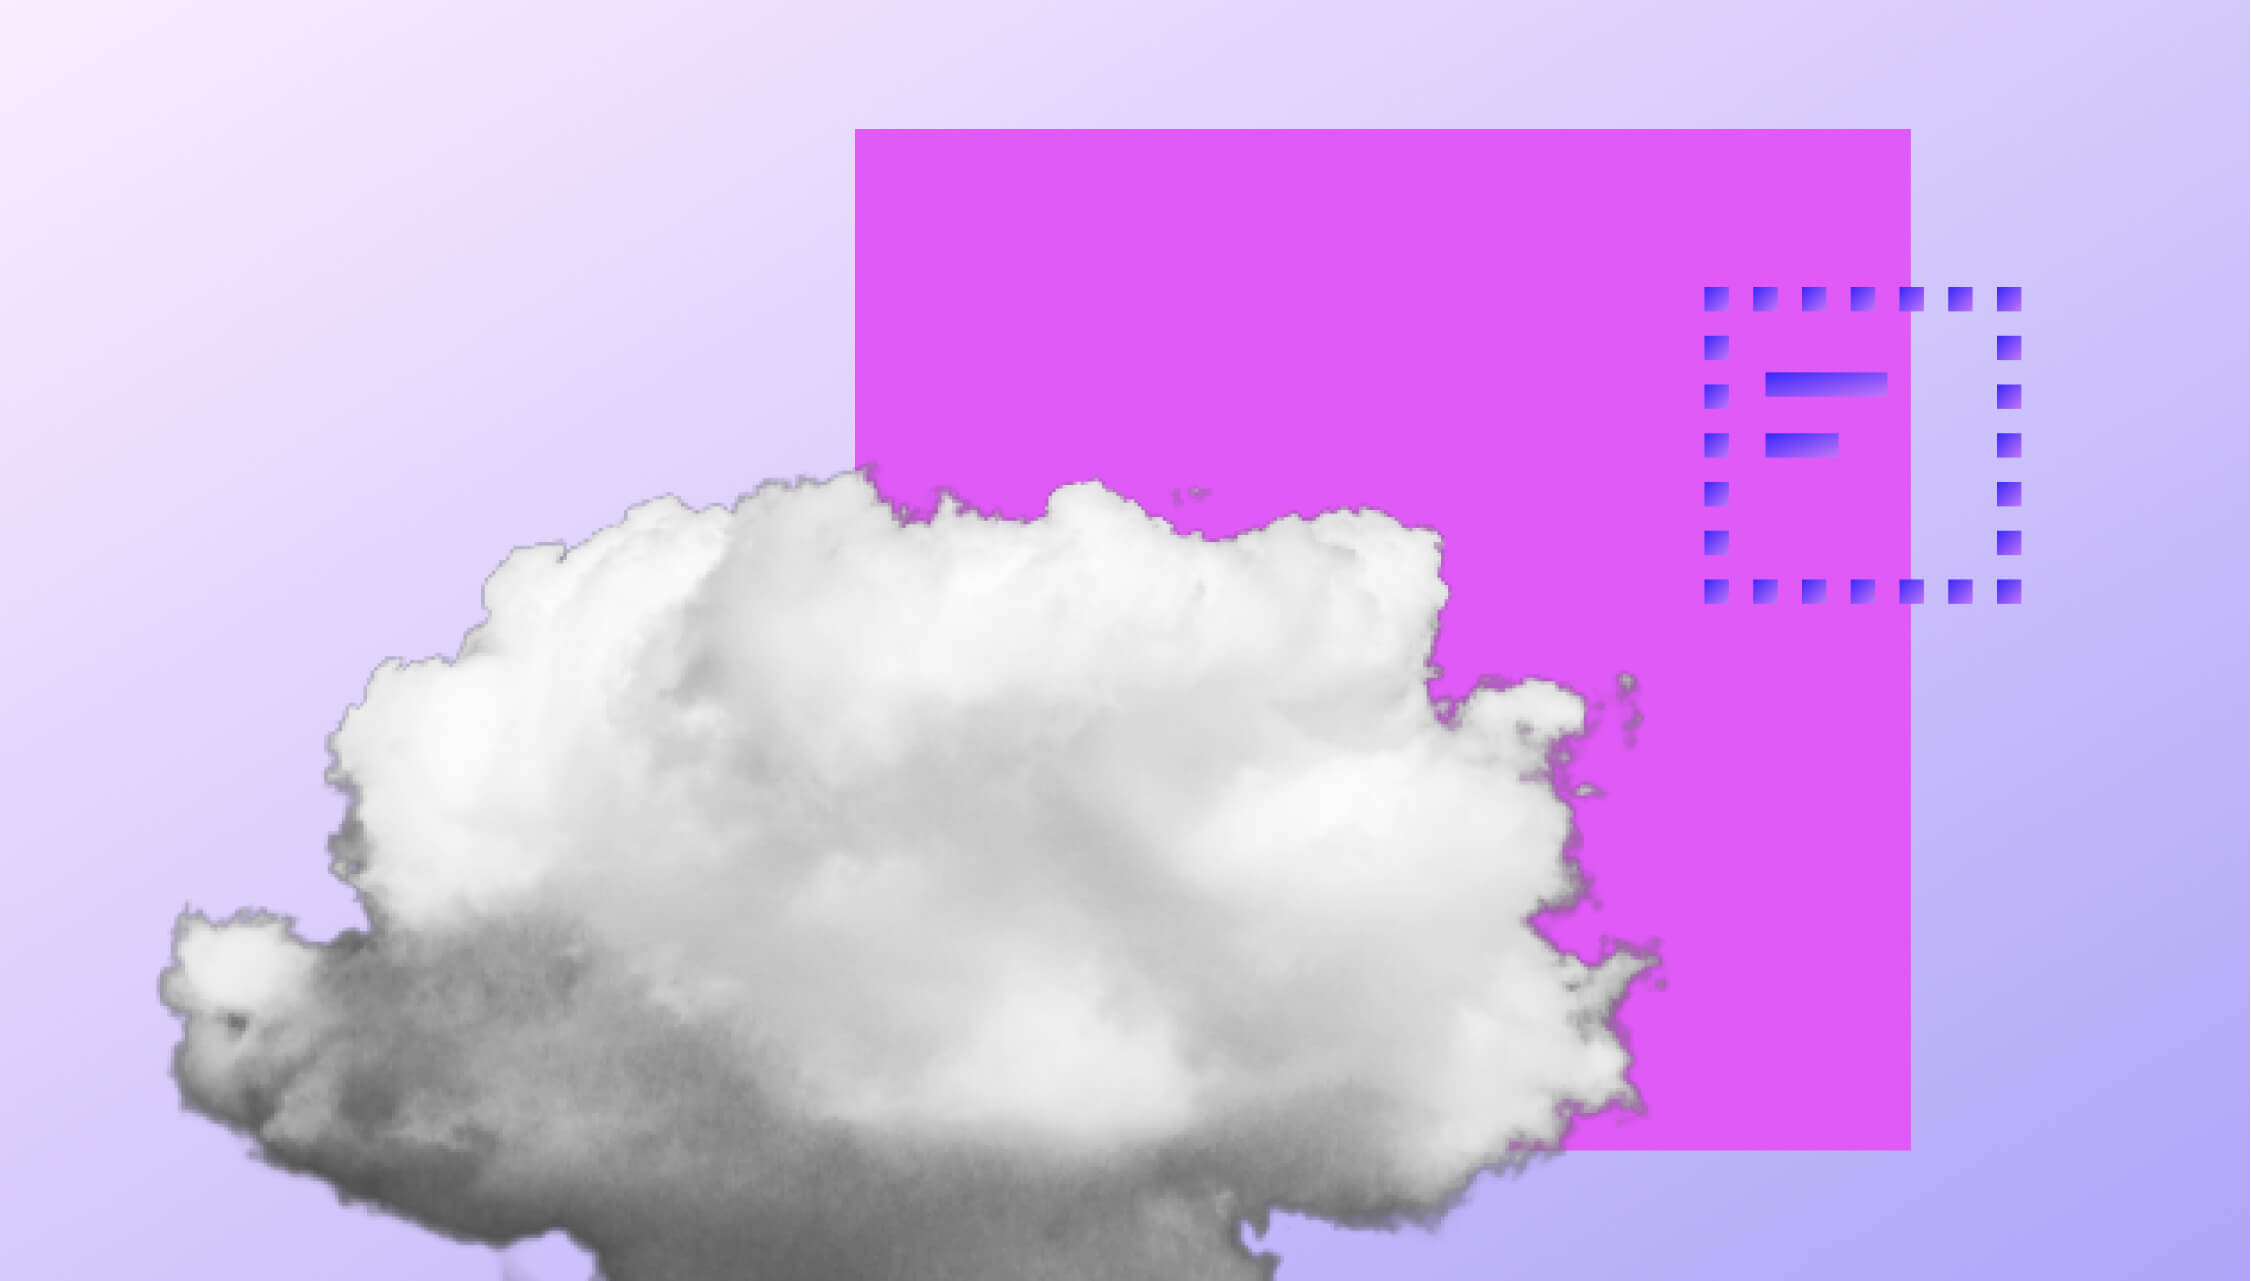 A cloud as symbol for reseller cloud in front of a purple icon for server and a square in pink